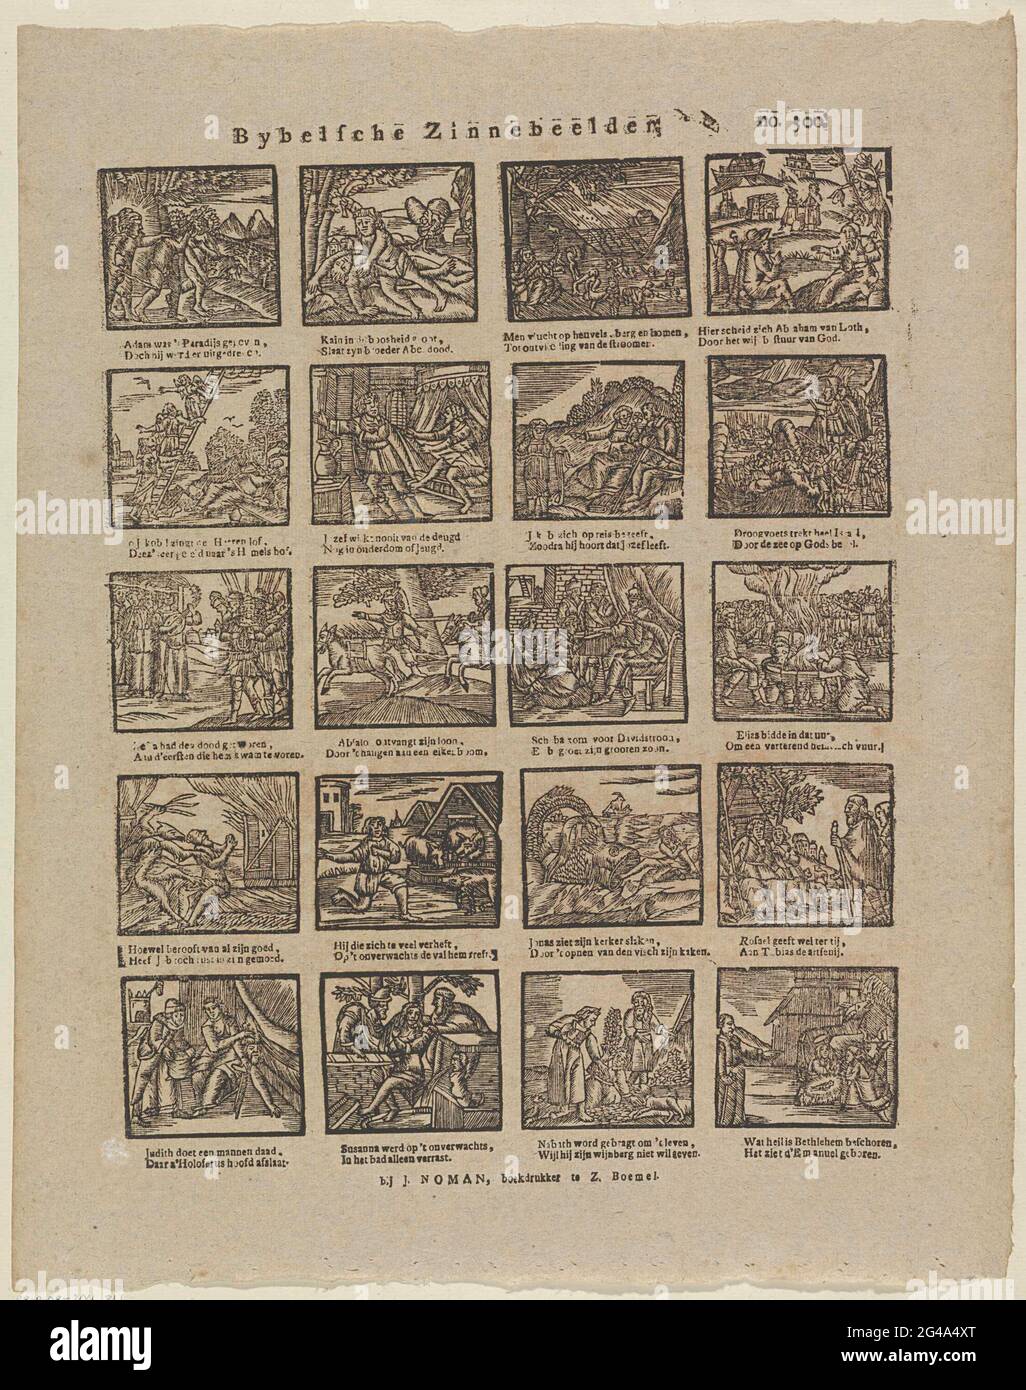 Bybelche Ziennmarks. Sheet with 20 representations of stories from the Old Testament, such as Adam and Eve's expulsion from Paradise, the death of Abel and Jonah thrown on dry land. Under each image a two-legged fresh. Numbered at the top right: No. 300. Stock Photo